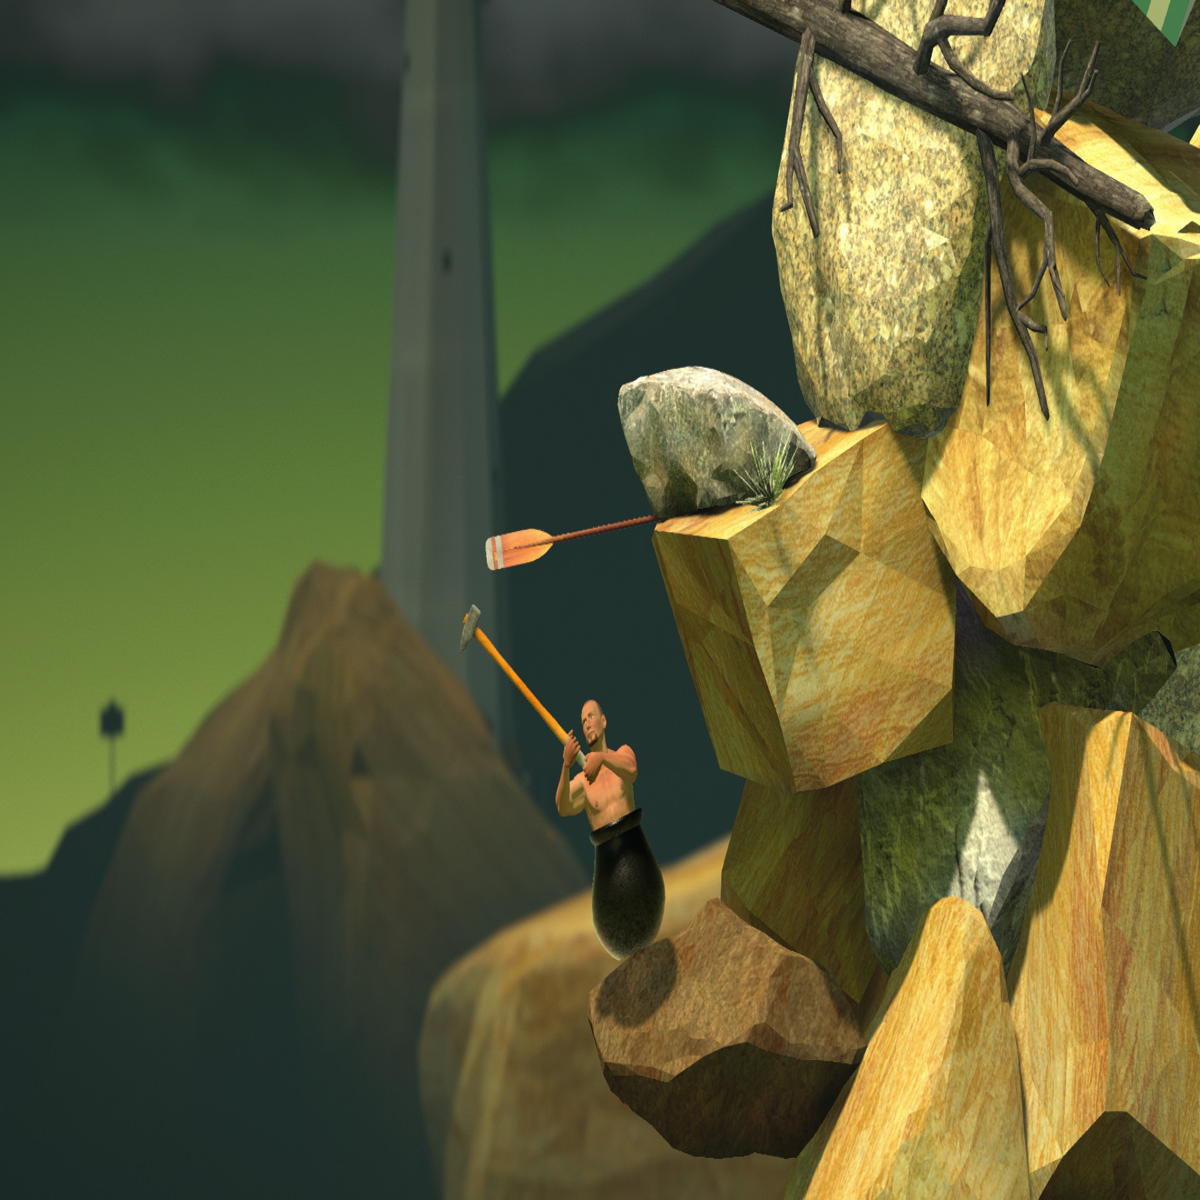 Getting Over It With A Shotgun - MODDED Getting Over It With Bennett Foddy  